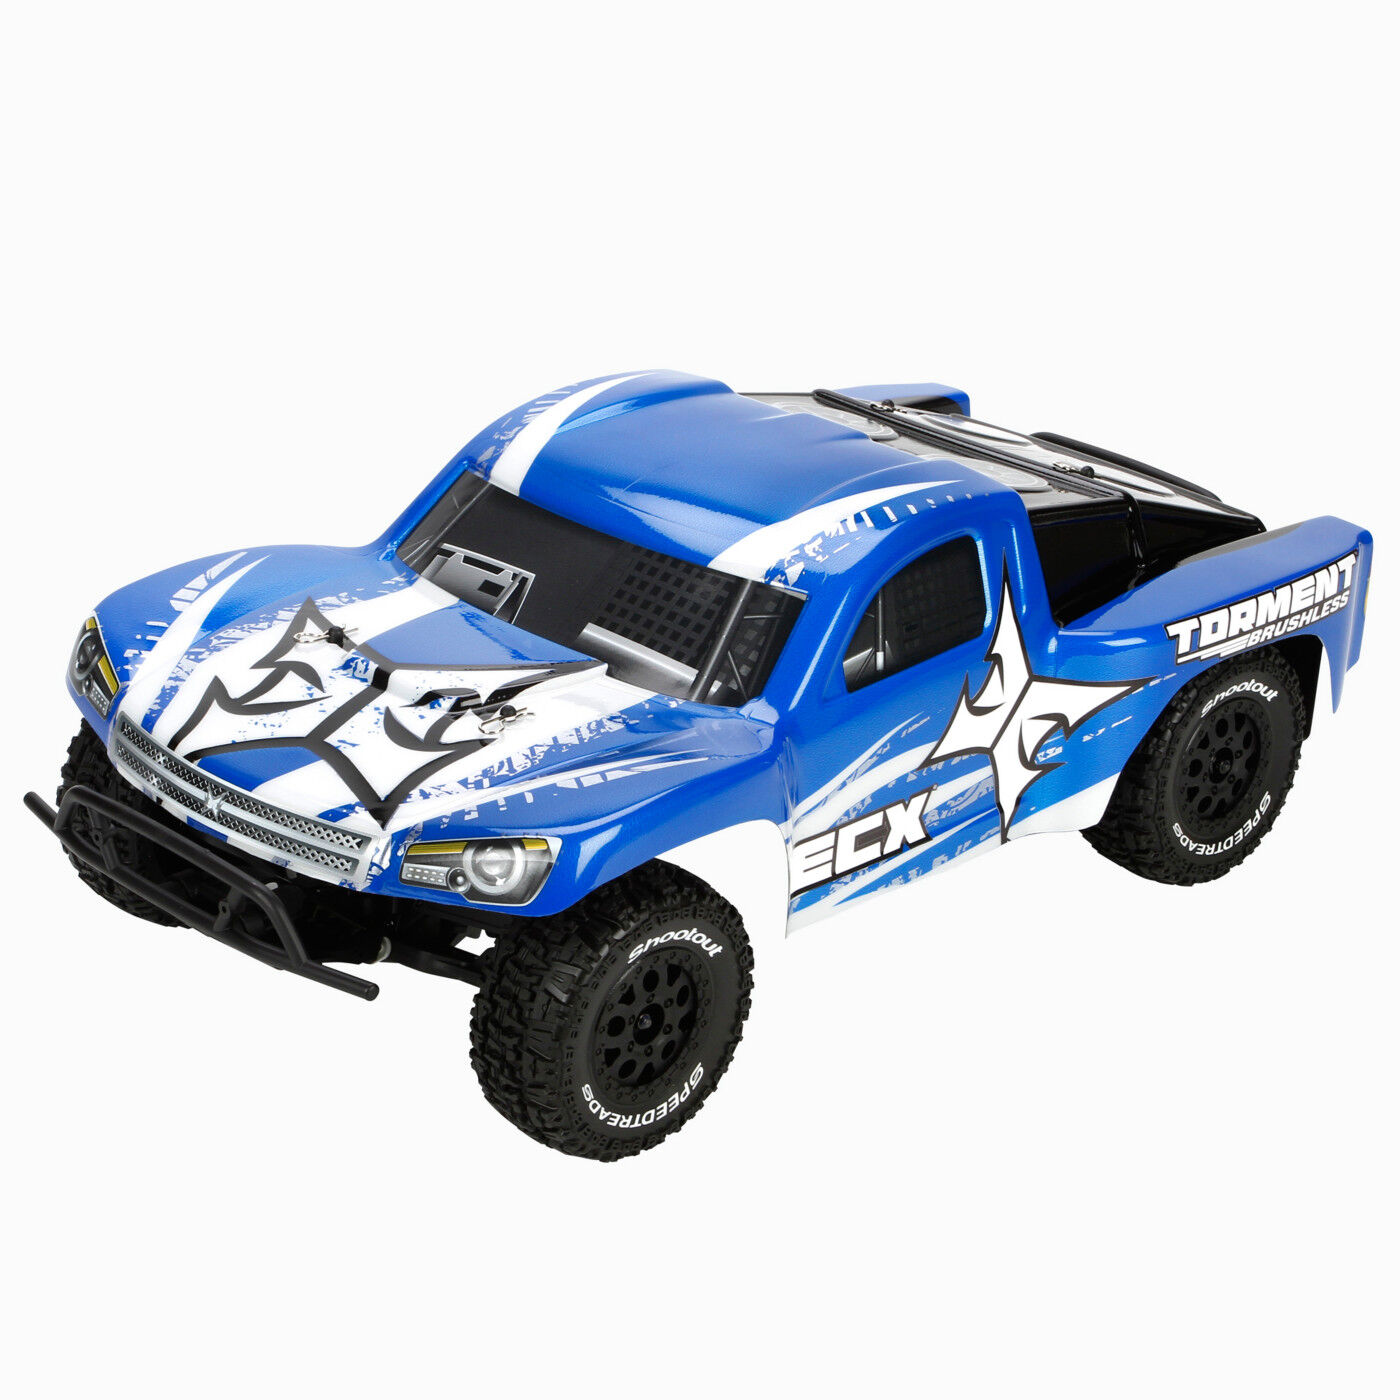 ECX 1/10 Torment 2WD Brushless SCT RTR 